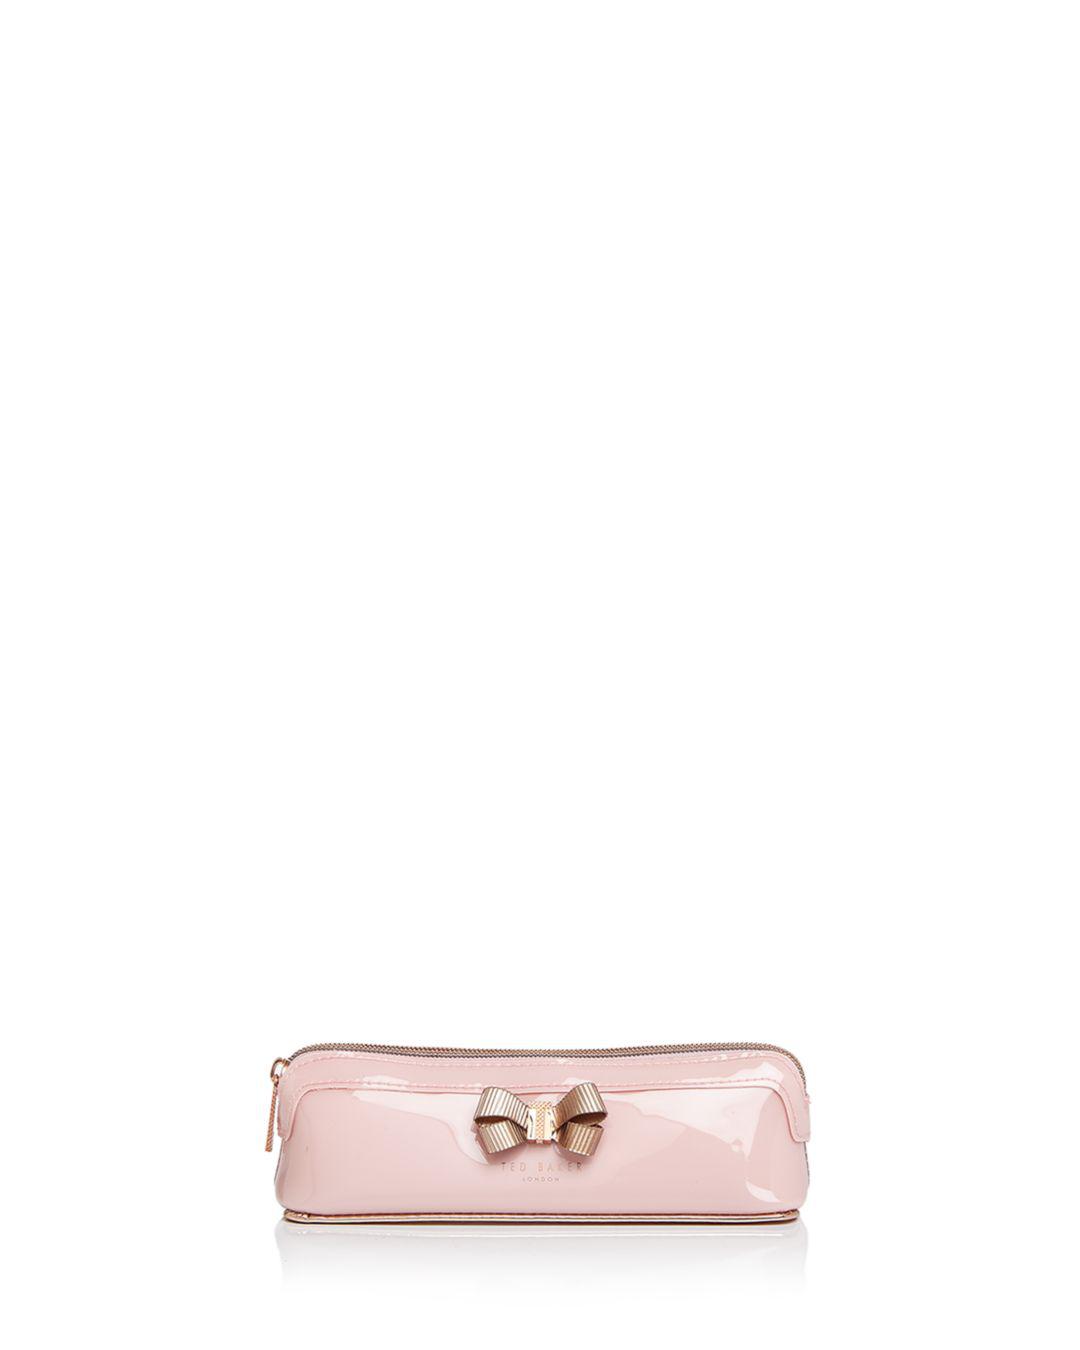 Ted Lora Bow Pencil Case in Pink | Lyst